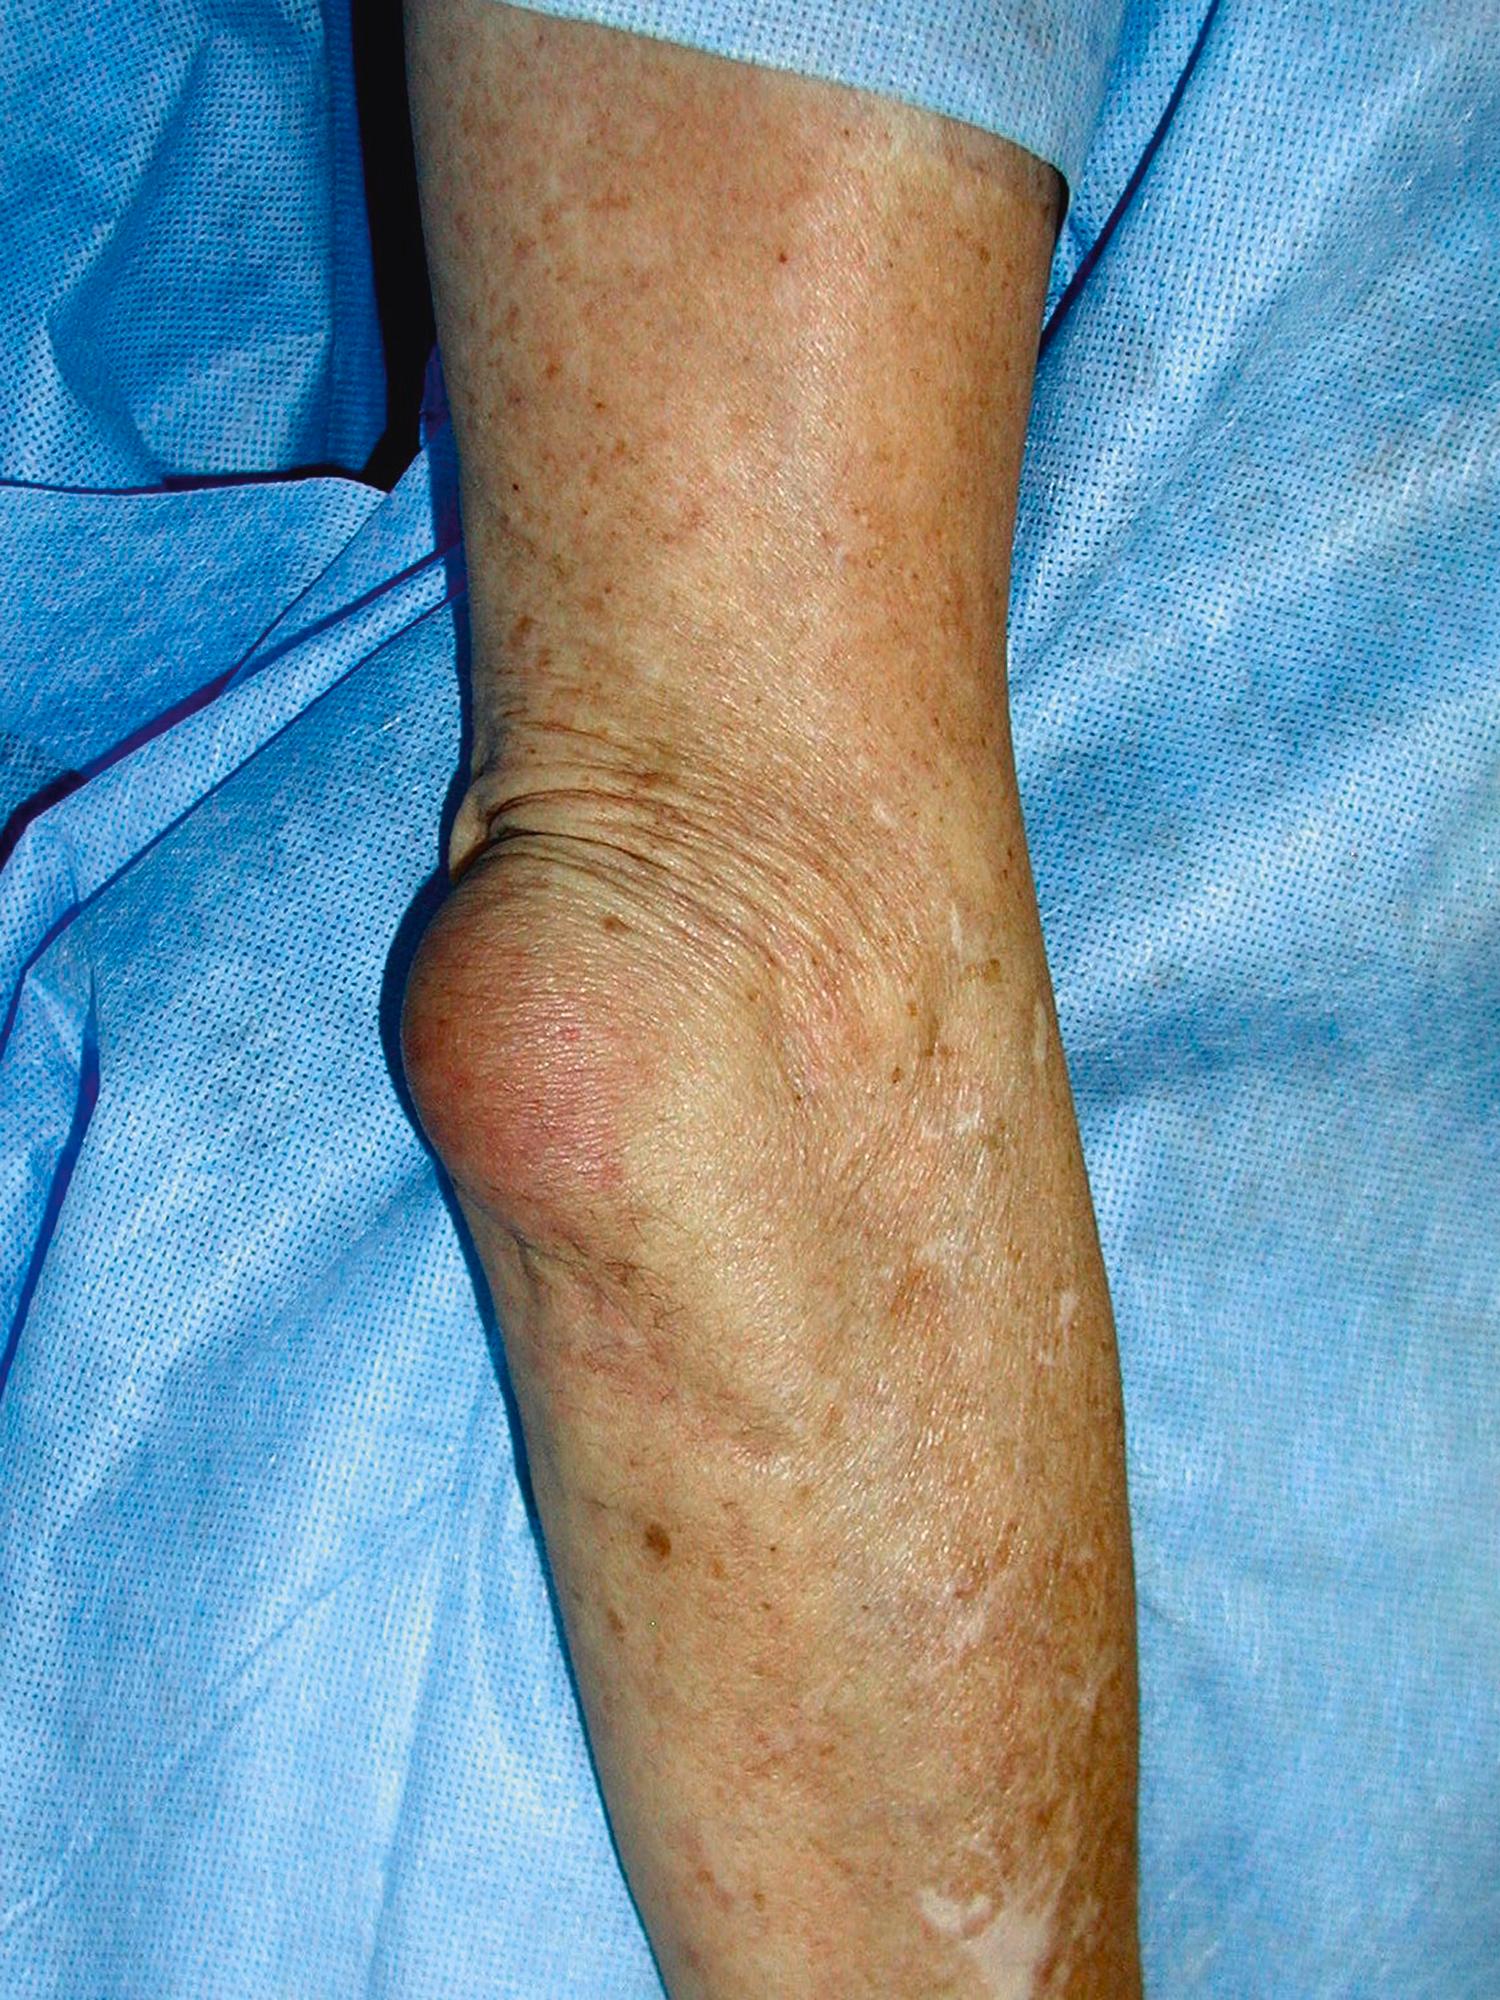 FIGURE 242-4, Olecranon bursitis in an older man. There is swelling at the elbow tip and “inverted U” furrows in the skin proximal to the bursa. For aspiration, the needle should be entered through normal lateral skin, aiming to the geometric center of the bursa to prevent leakage. The aspirated fluid was noninflammatory, sterile on culture, and contained no crystals. In septic bursitis, there may be marked swelling, even suggesting a septic elbow. However, careful passive extension is complete and painless, ruling out septic arthritis.